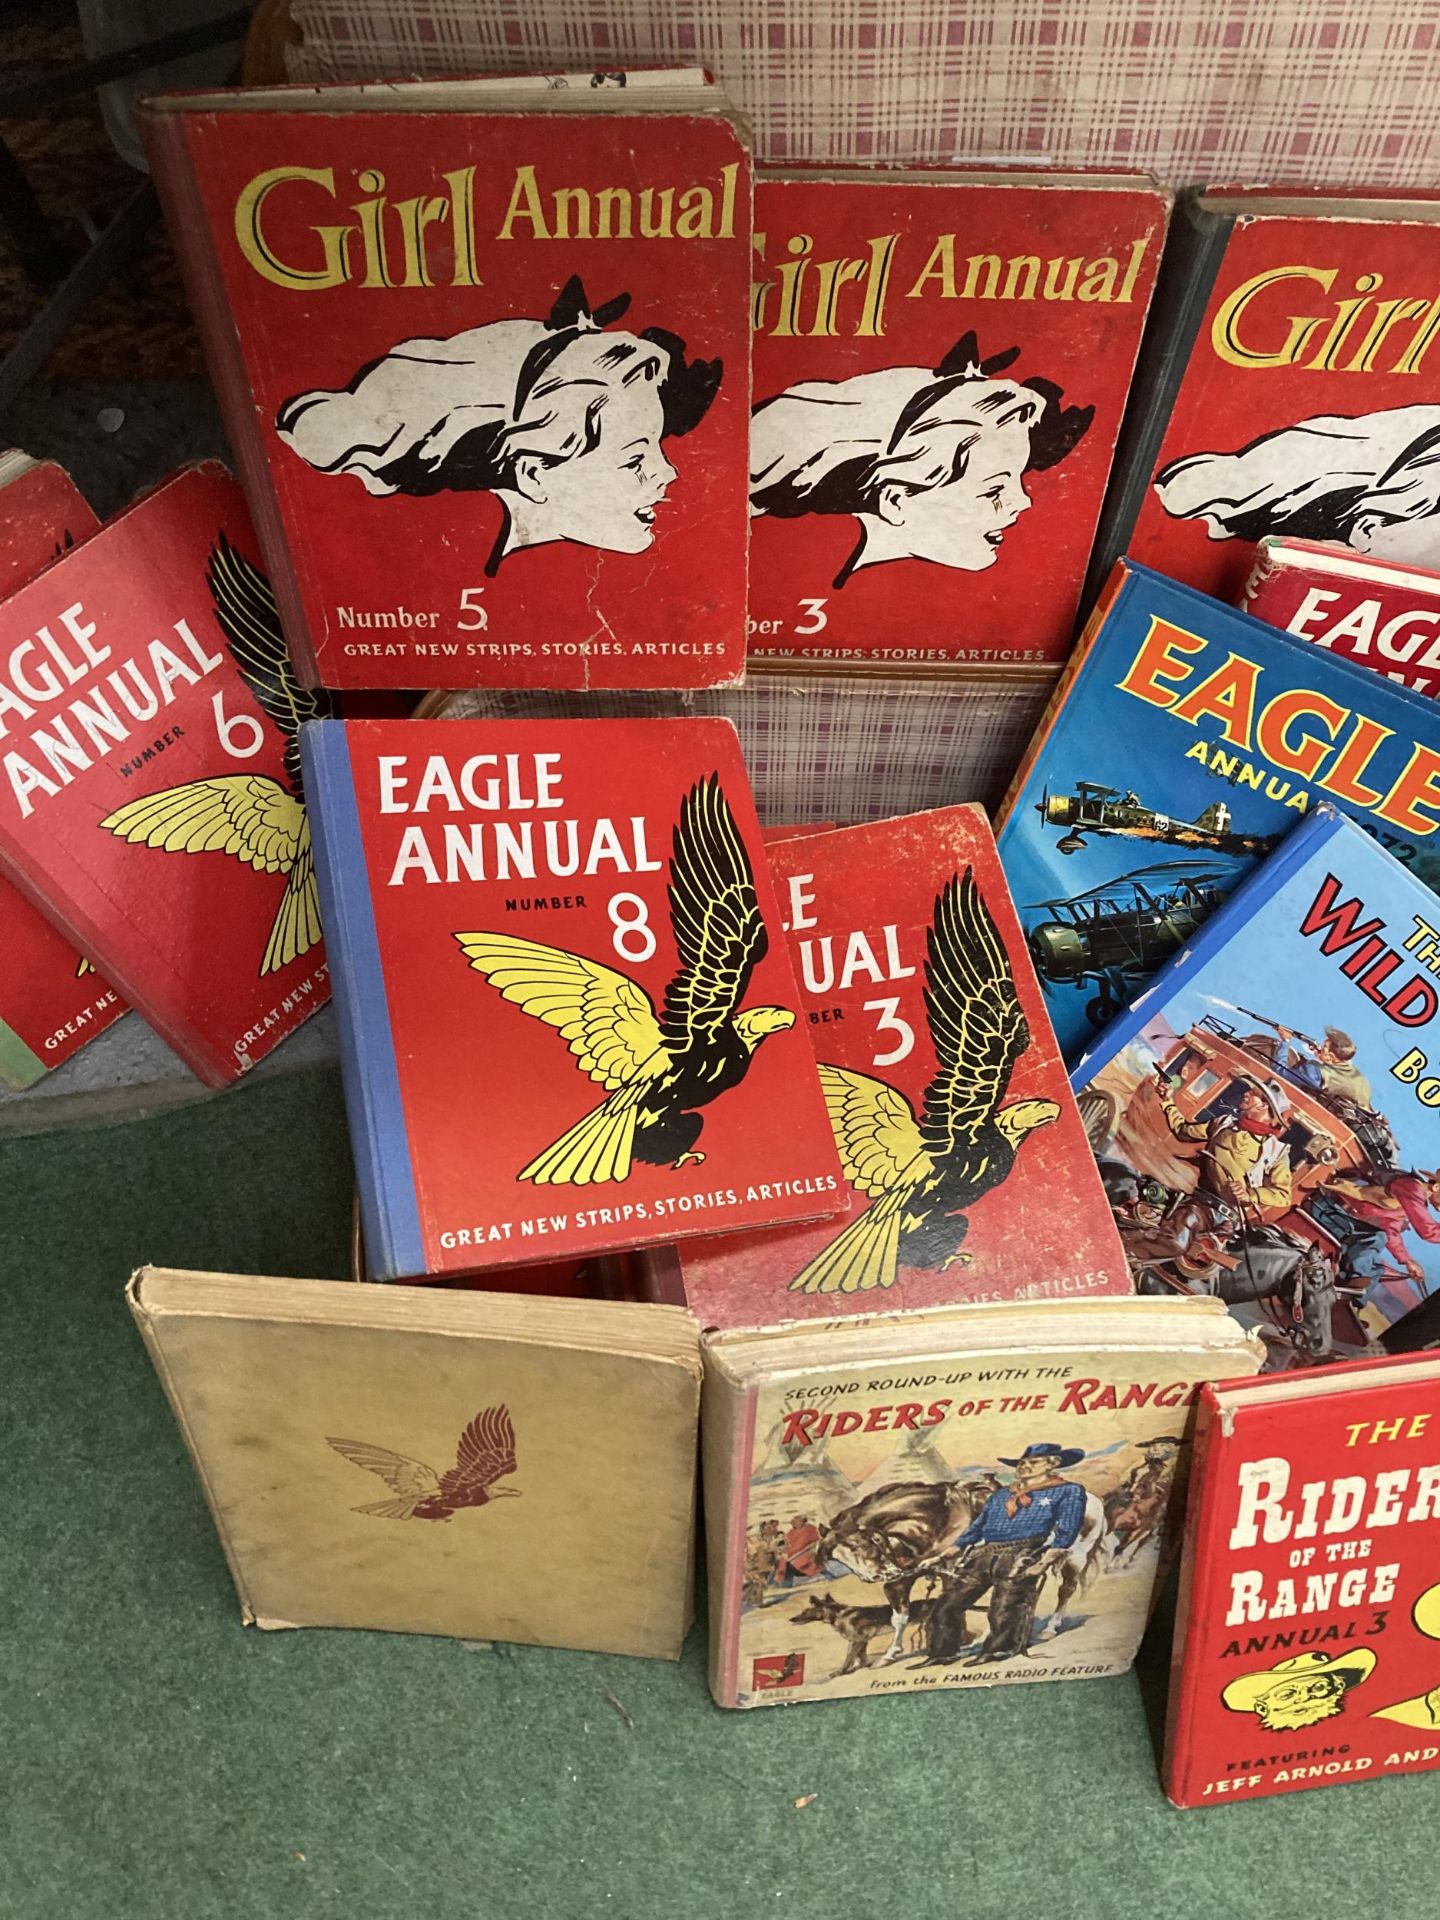 A COLLECTION OF VINTAGE EAGLE AND GIRL ANNUAL BOOKS - Image 3 of 4